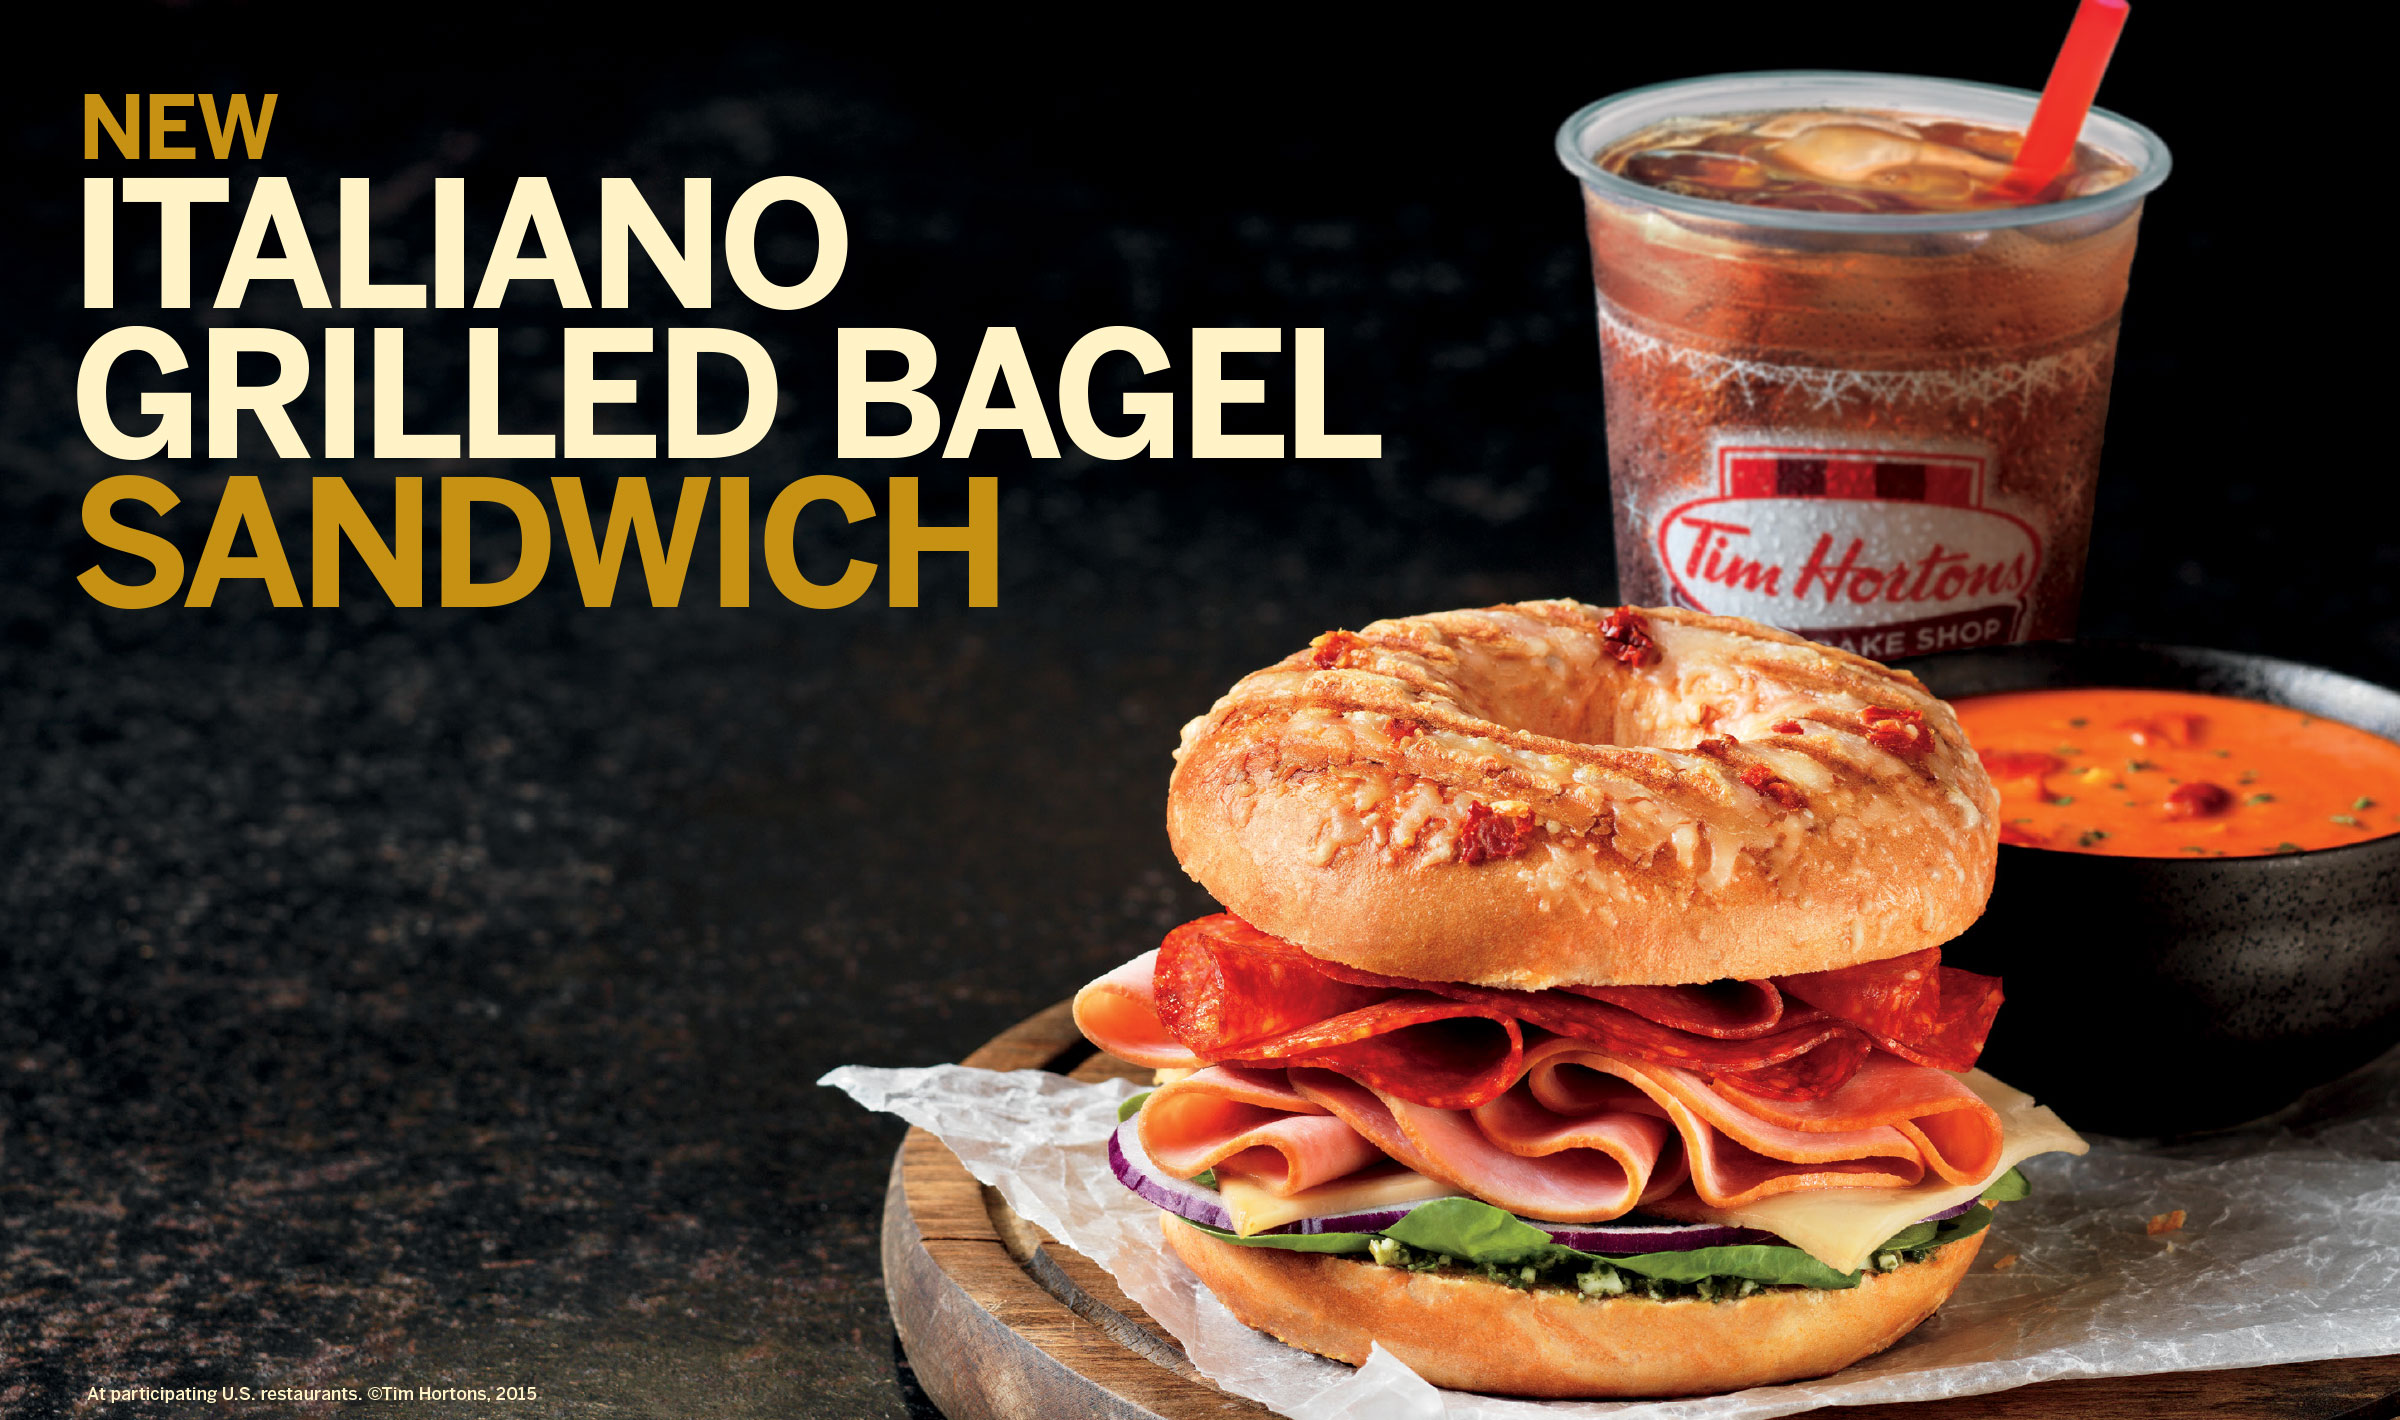 Ad for an Italian bagel sandwich, with the sandwich, a bowl of tomato soup, and a cup of iced tea sitting on a cutting board against a dark background